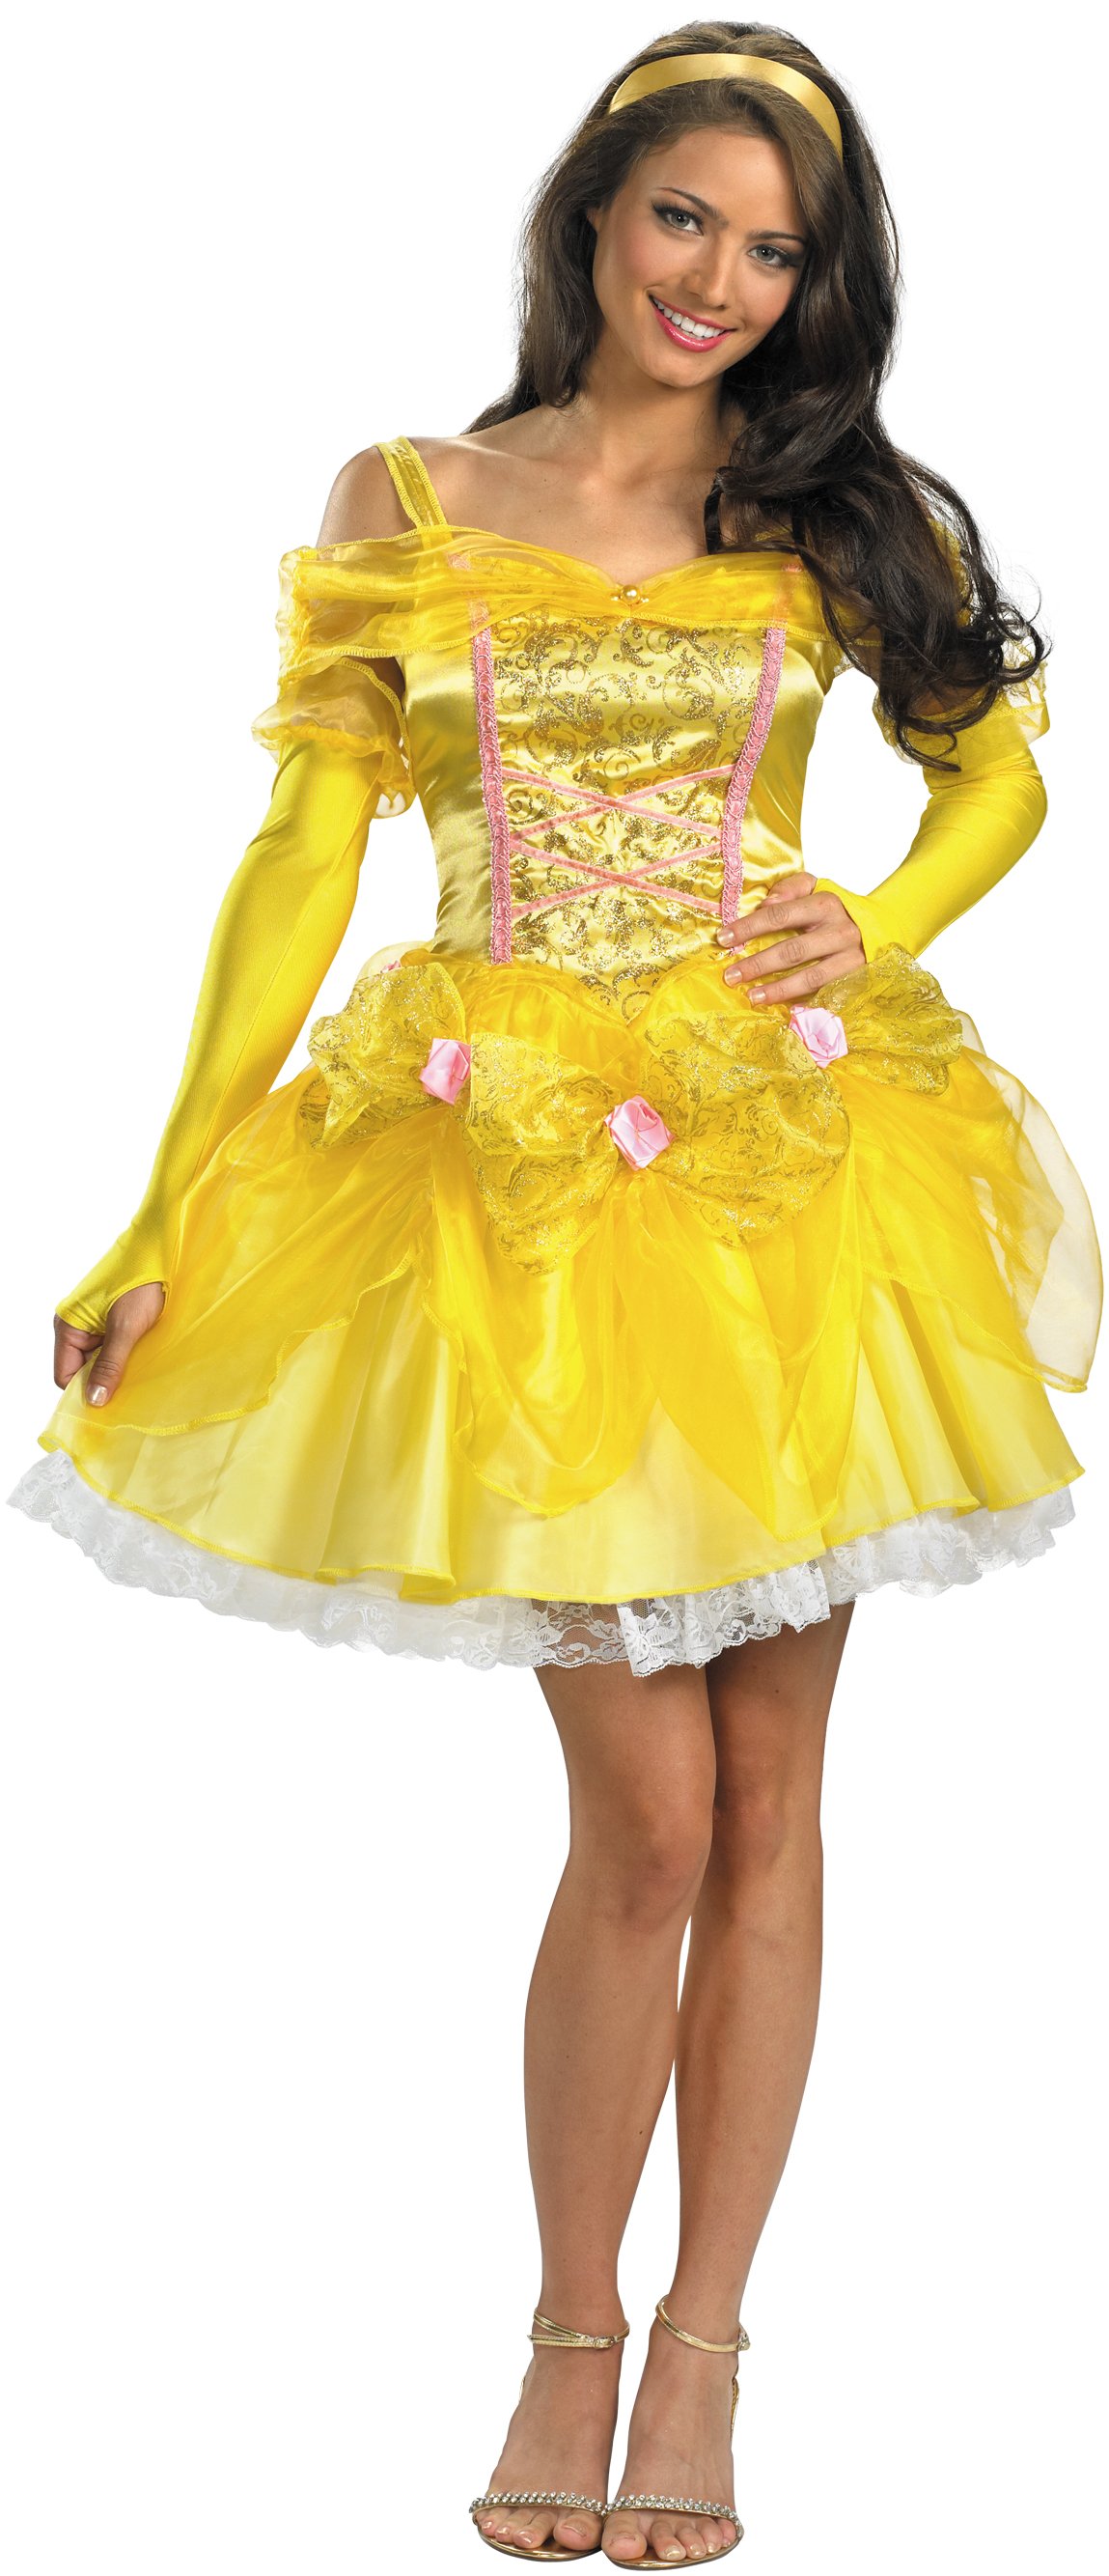 Beauty And The Beast - Sassy Belle Adult Costume